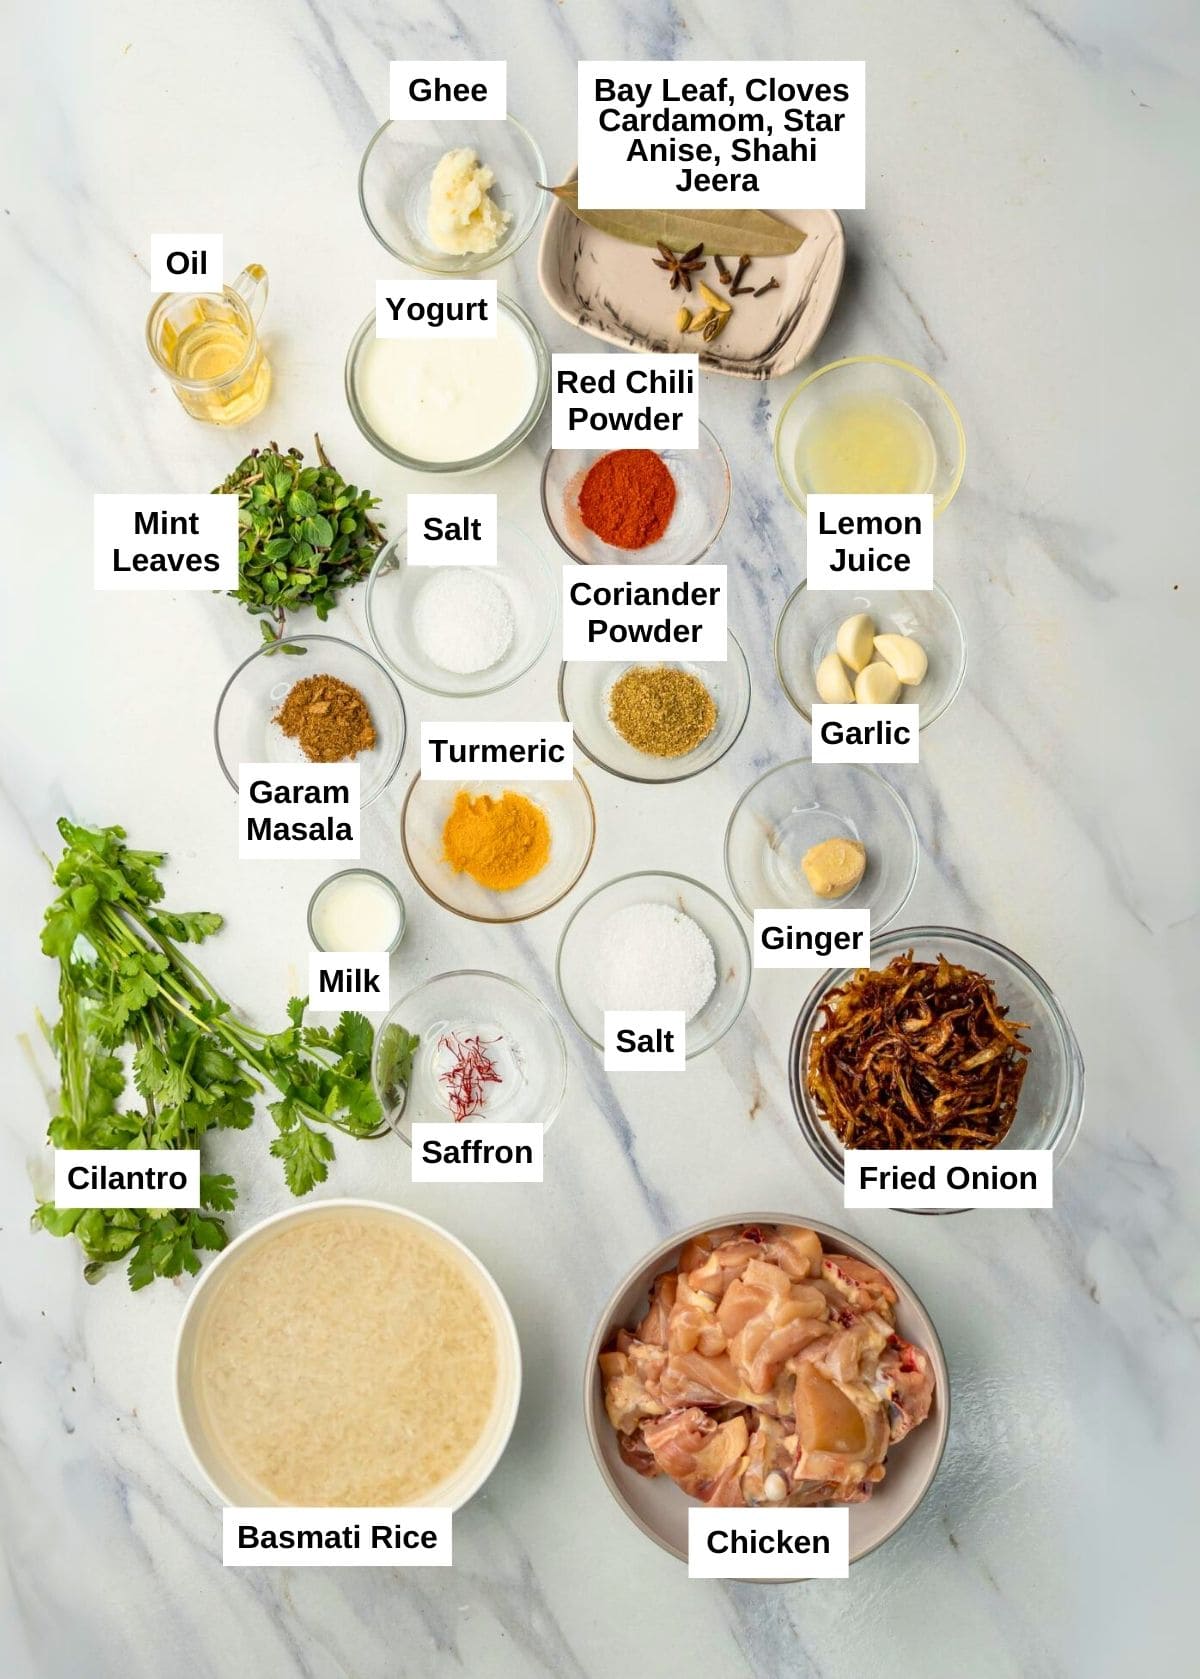 Ingredients you'll need for Chicken Biryani